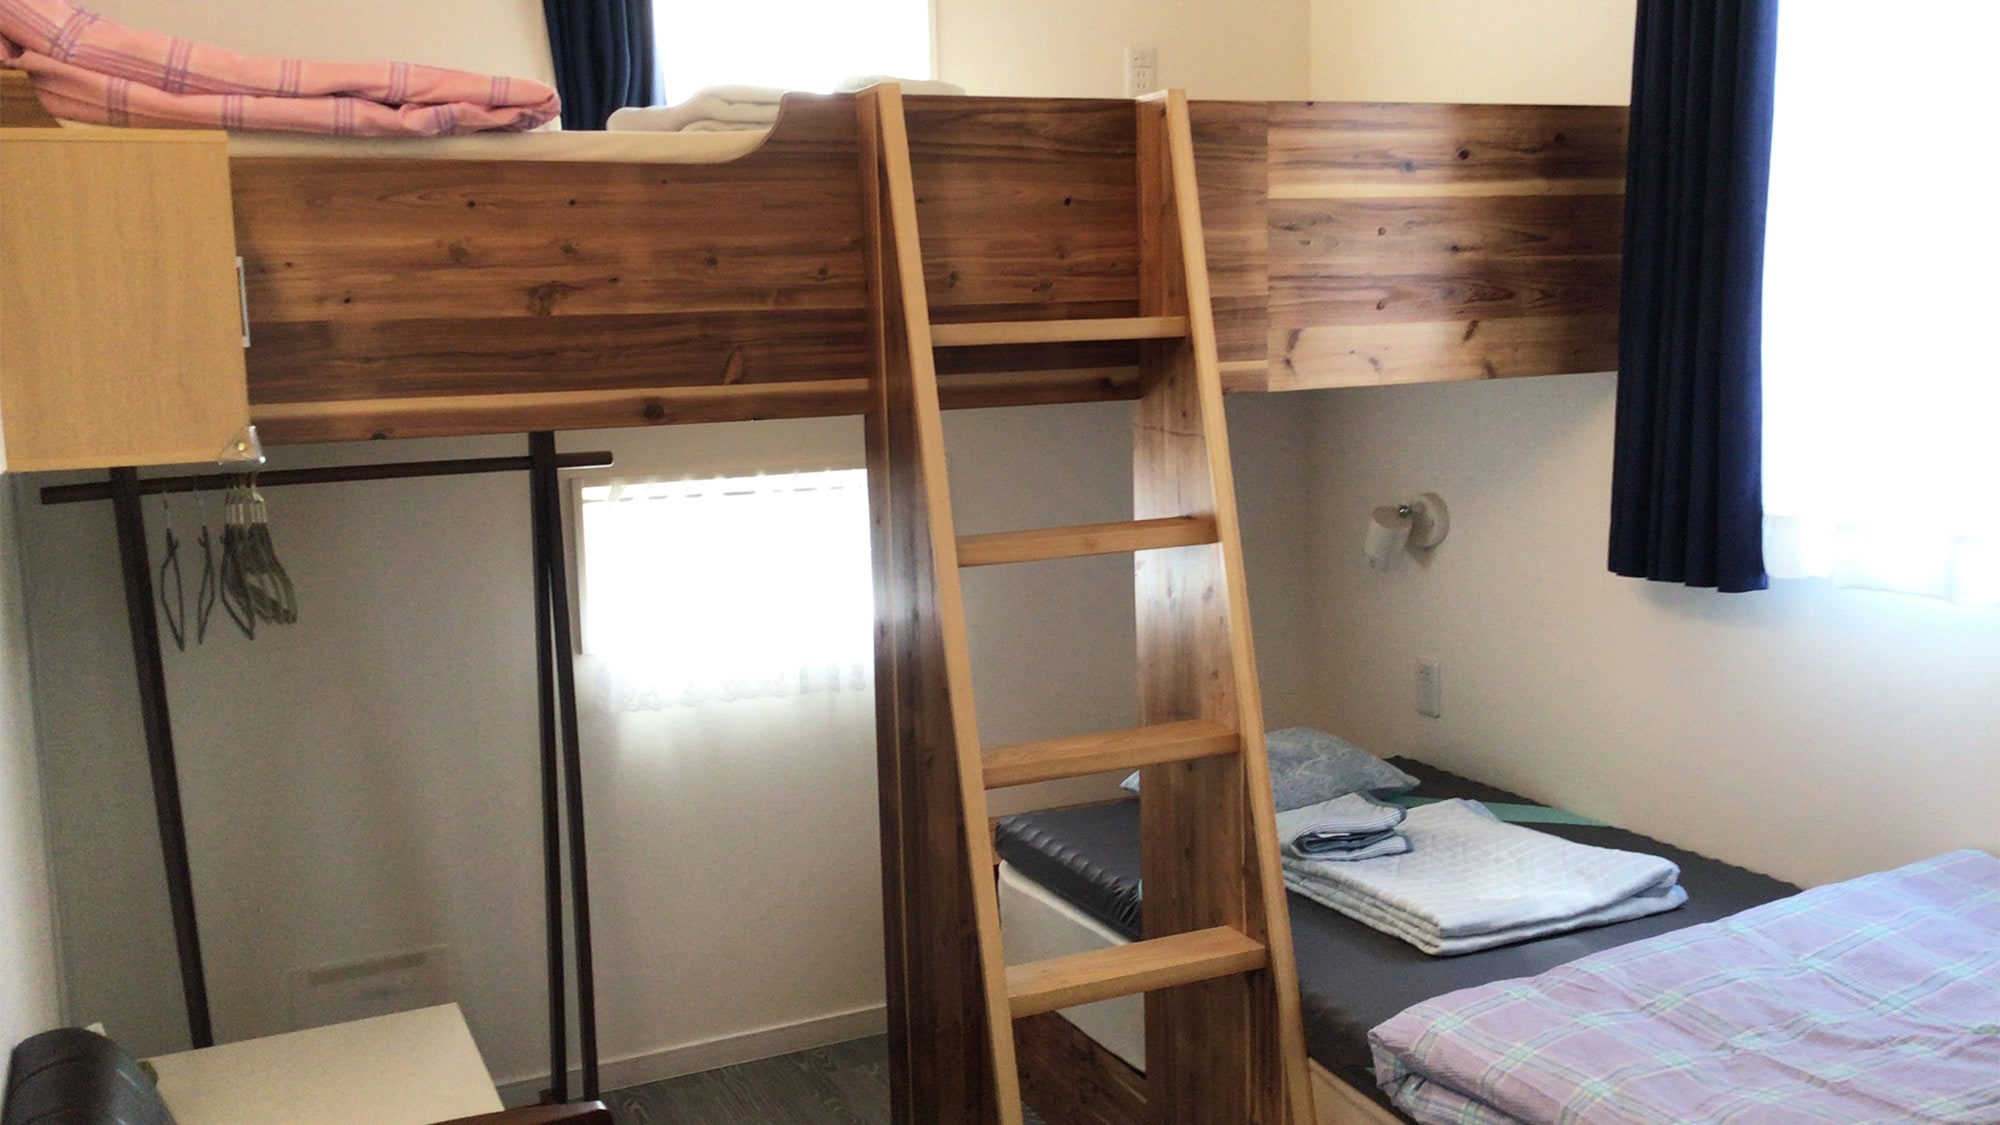 ・ A room with different bunk beds. Up to 3 people can be accommodated with a folding bed